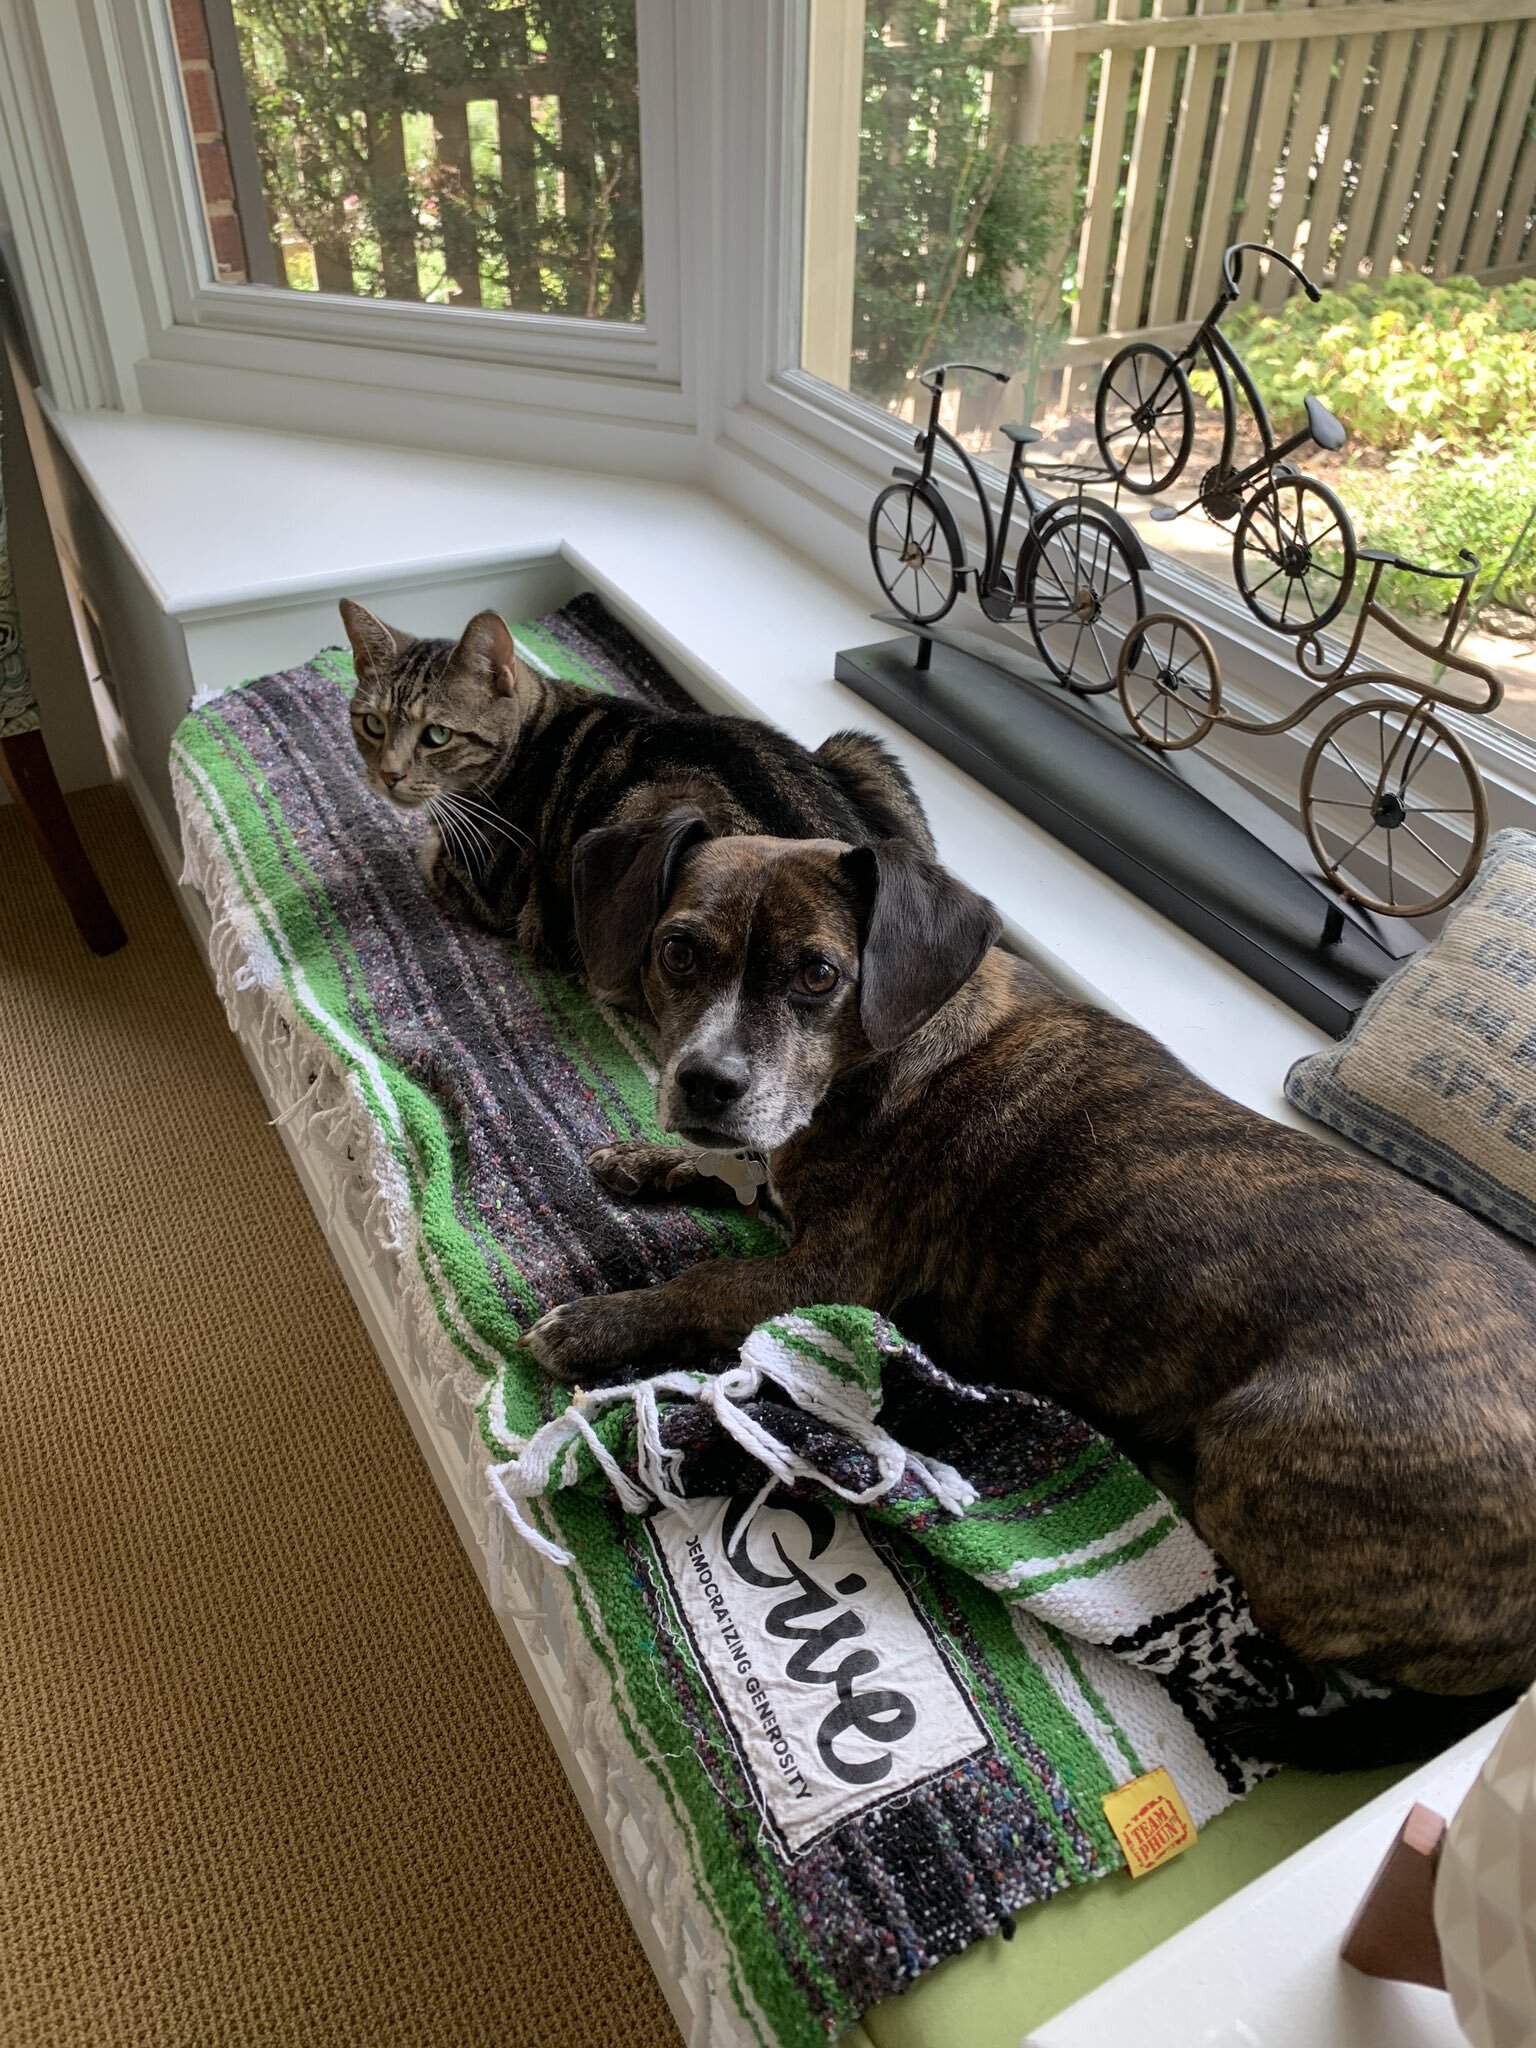 Two pups sitting on a GiveWP blanket in the window.